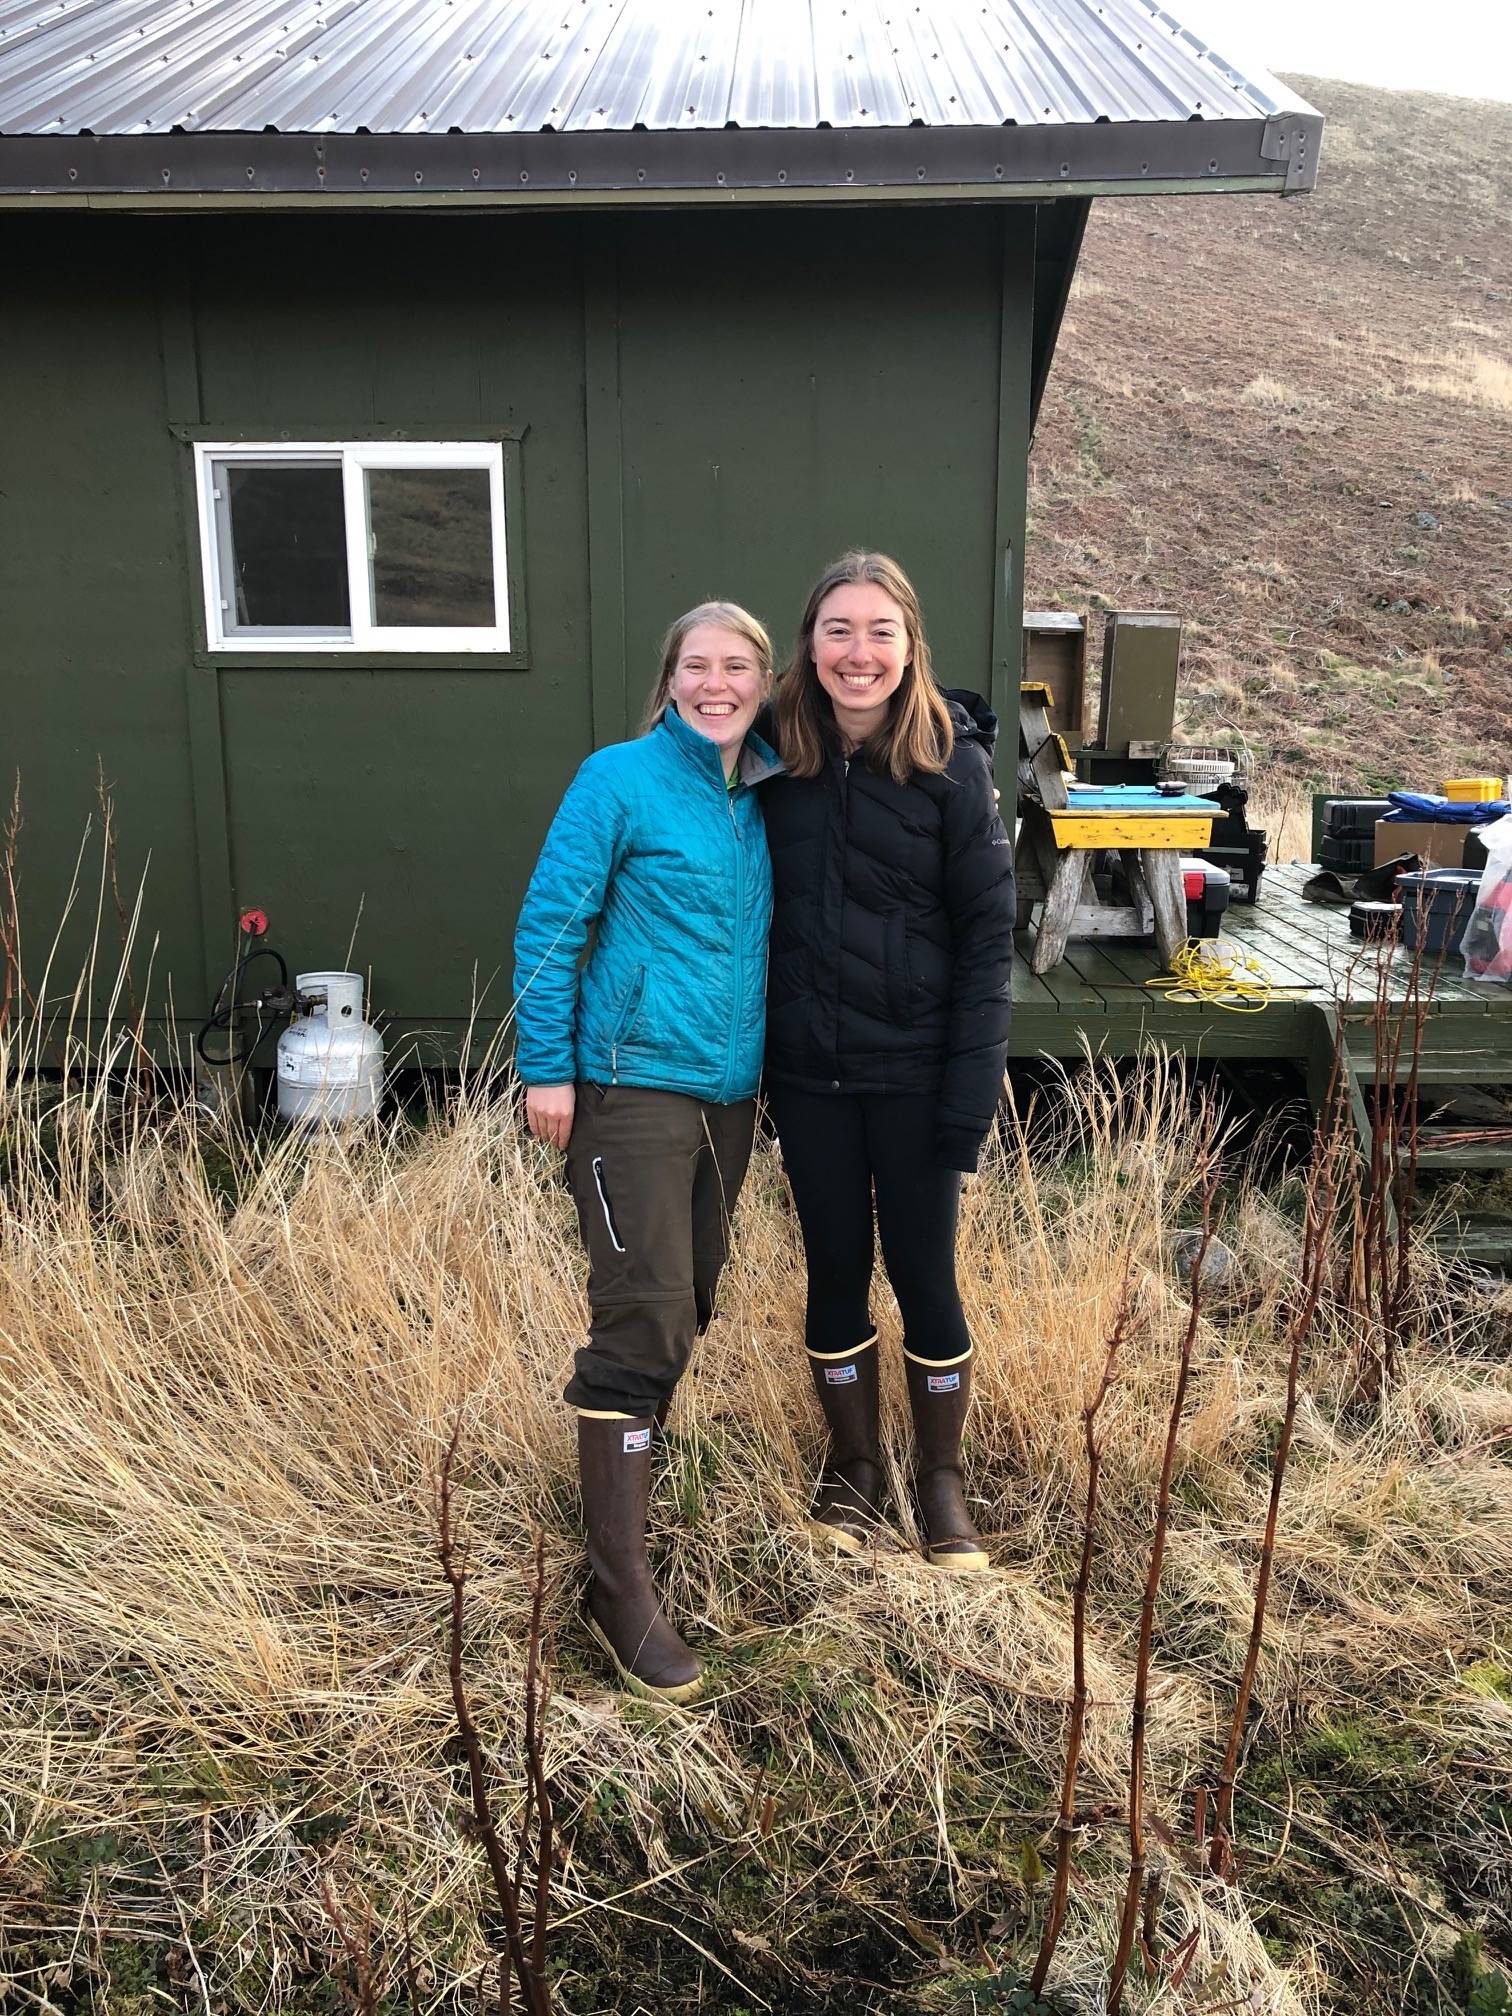 Biologists Briana Bode, left, and Katie Stoner as they were dropped off at their cabin on Chowiet Island in May 2021. The women recently experienced a magnitude 8.2 earthquake there, not far from the epicenter.(Courtesy Photo / Heather Renner, Alaska Maritime National Wildlife Refuge)